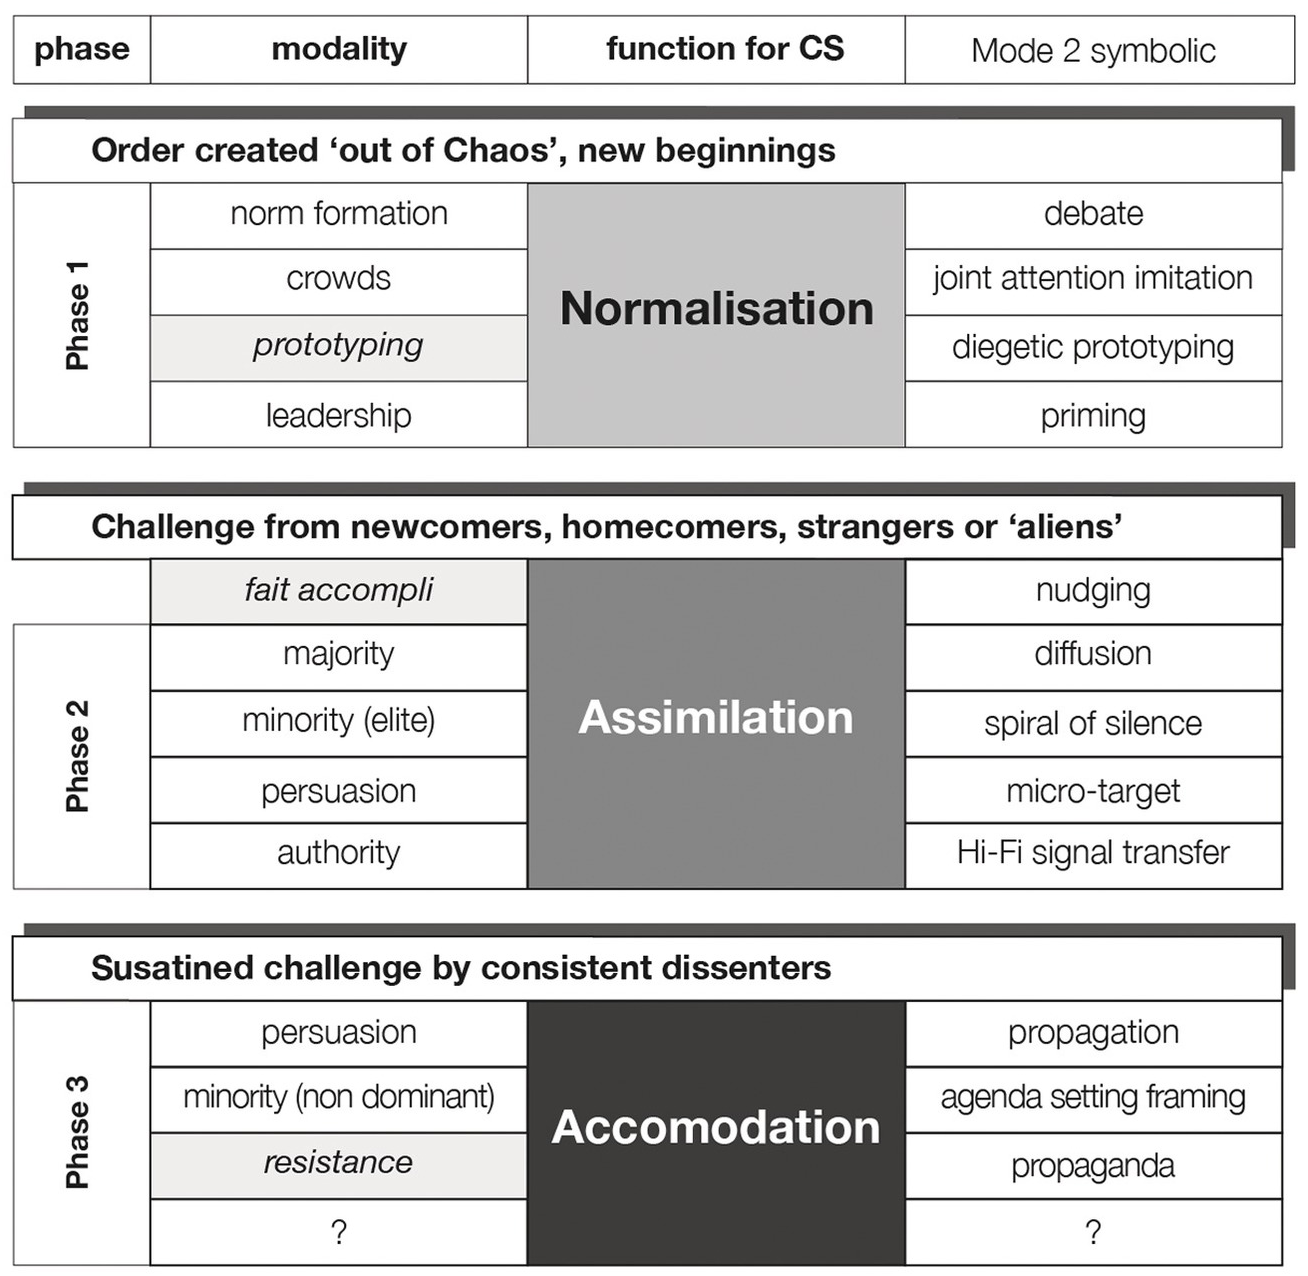 Cognition, cues, nudges and affordances in mobile communication